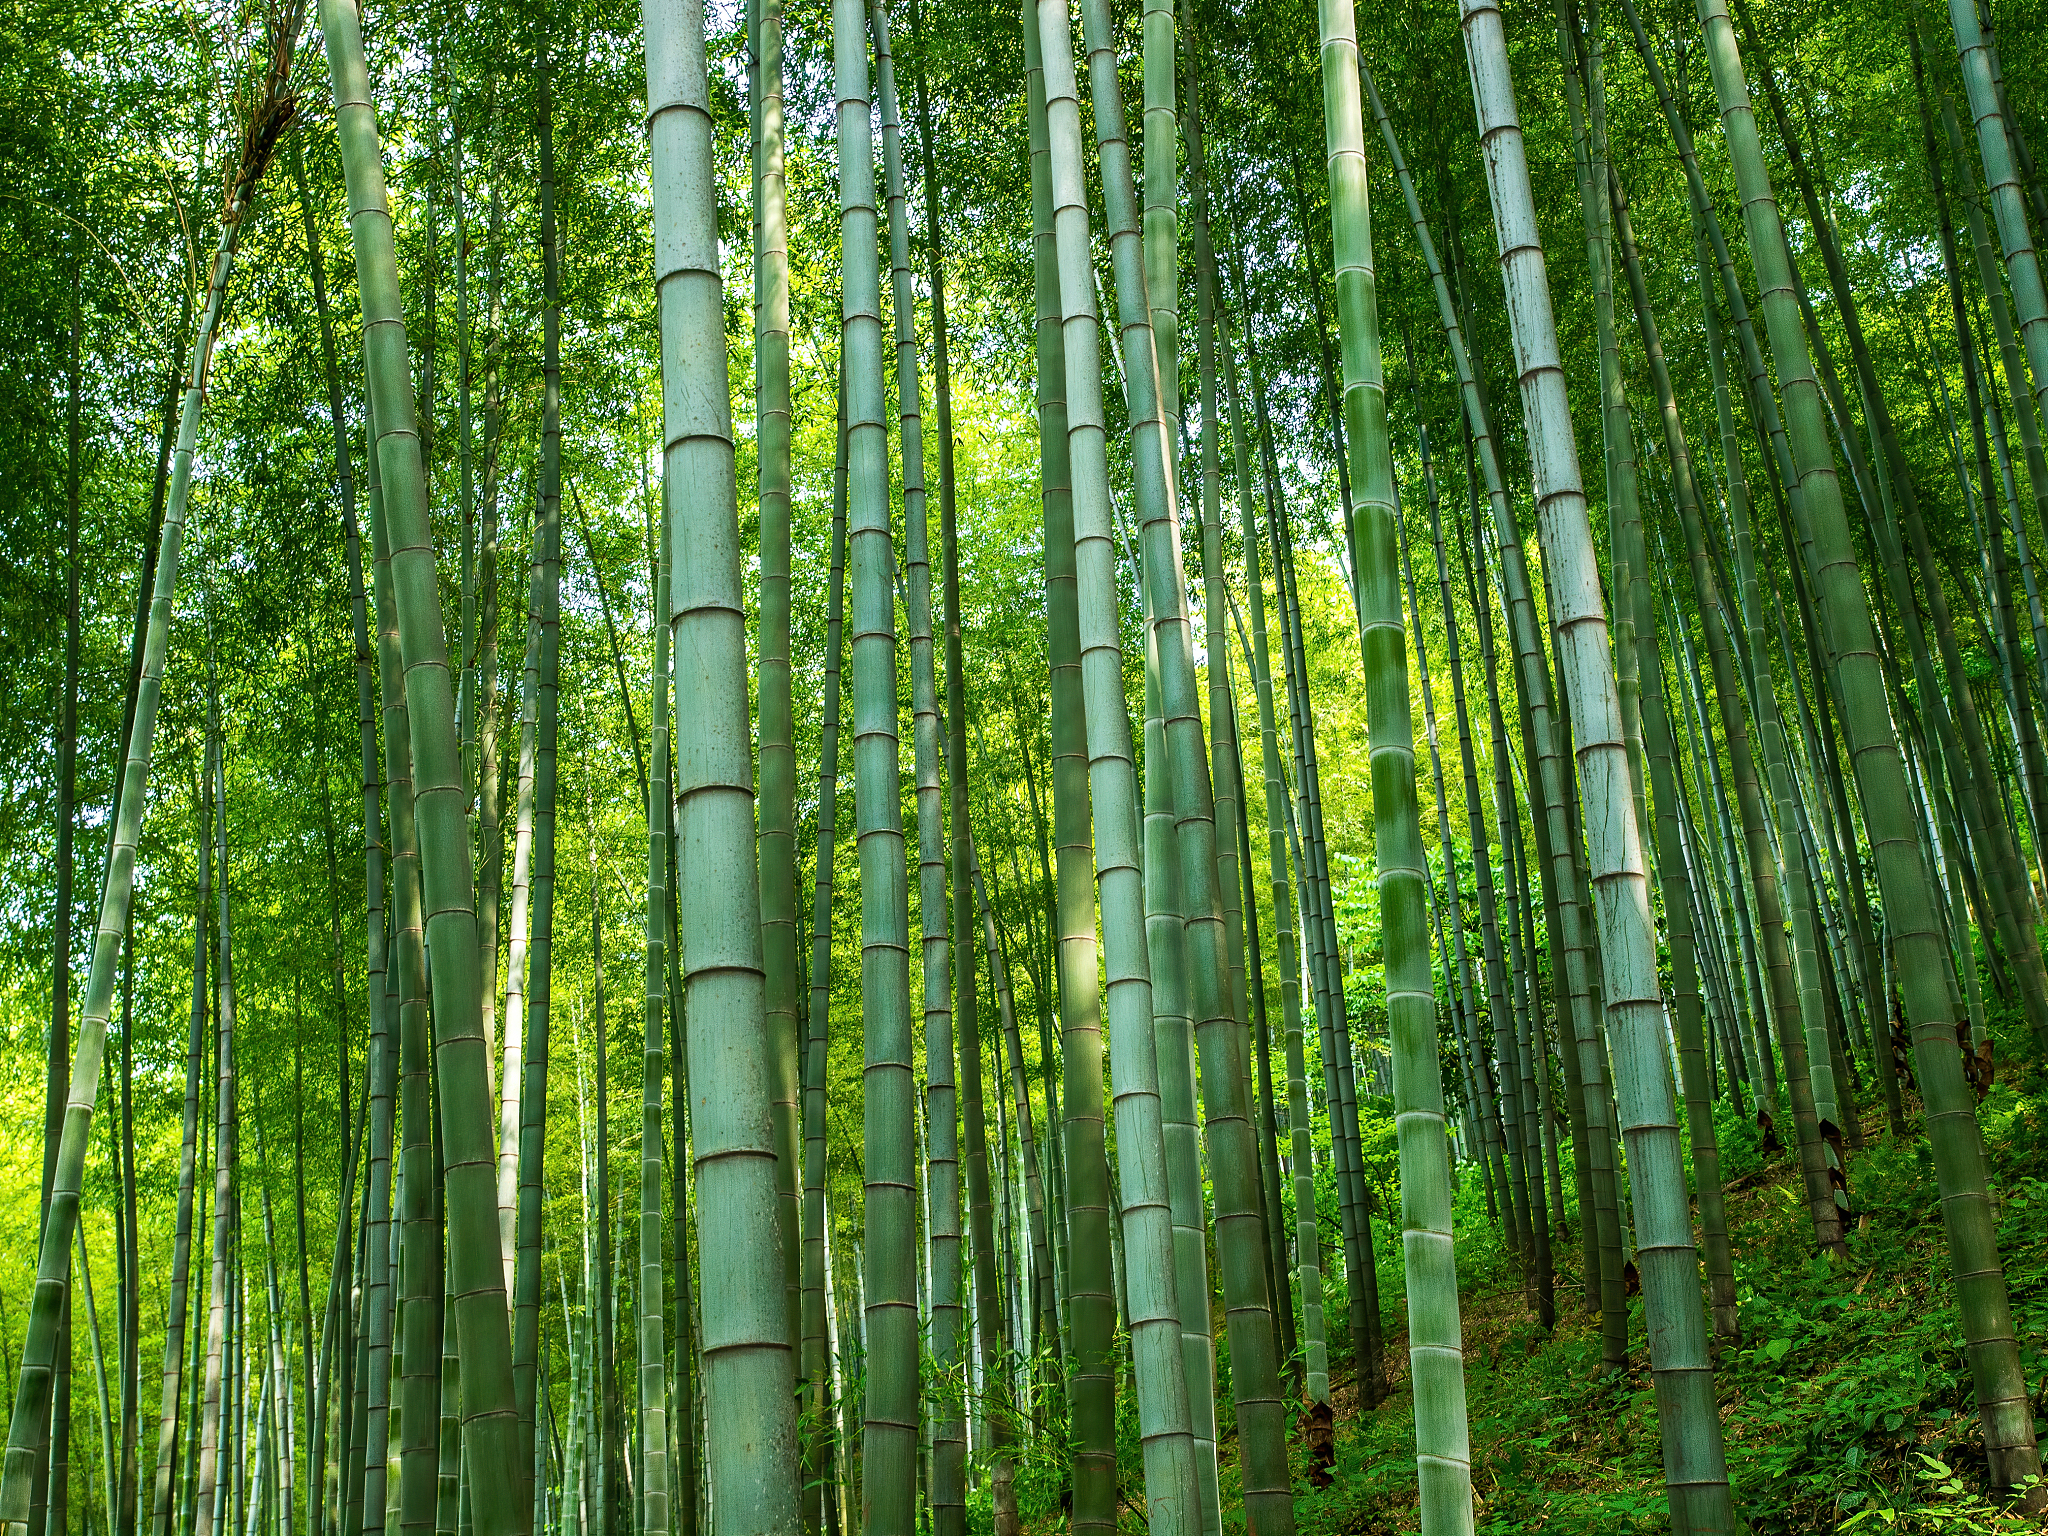 Explore Wuxi: Dive into the serenity of Yixing Bamboo Forest